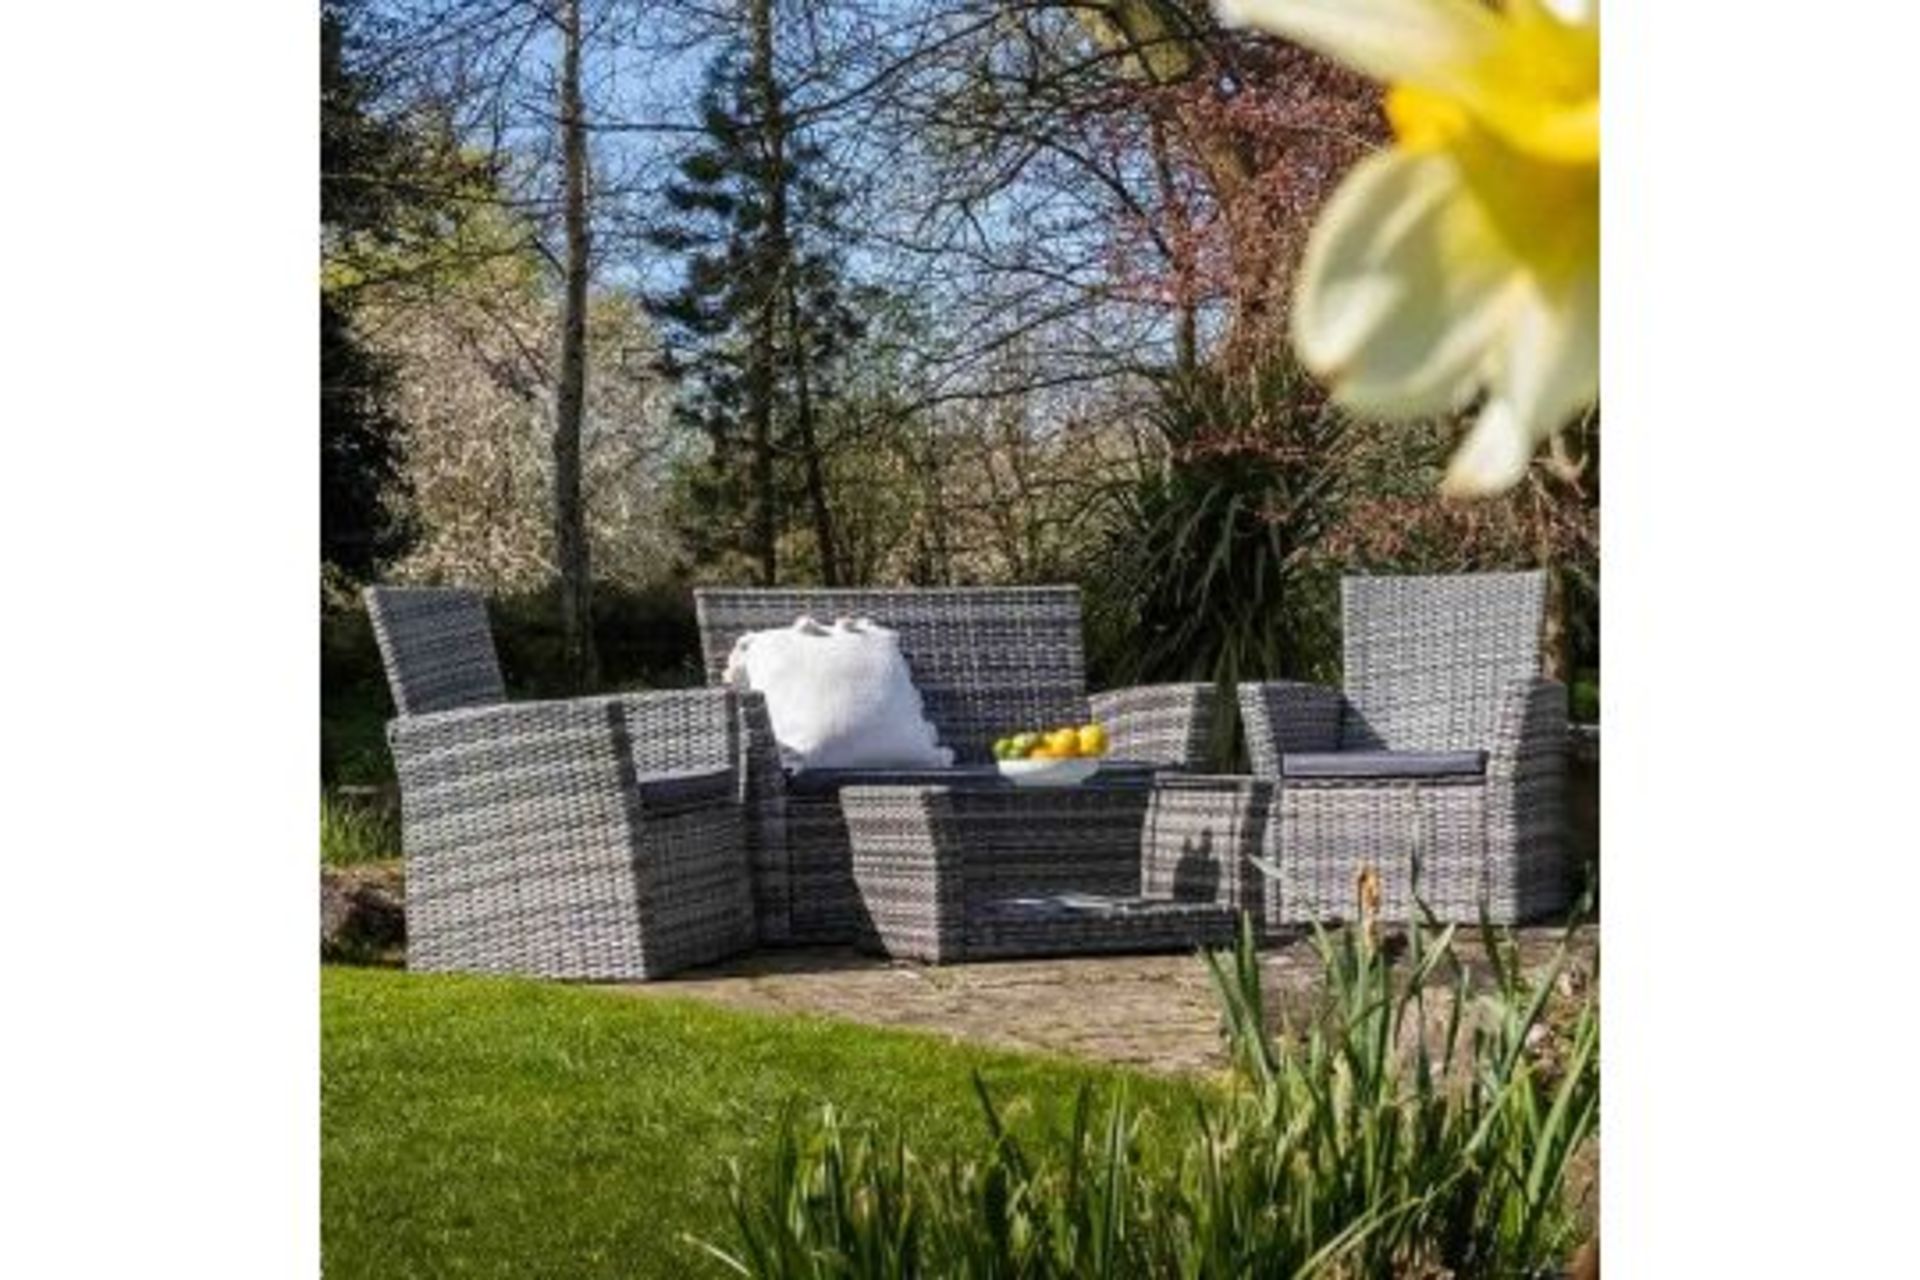 COMMERCIAL LOT 4 X New Boxed Corfo 4 Seater Garden Furniture Set in Grey. The 4-piece garden - Image 6 of 6